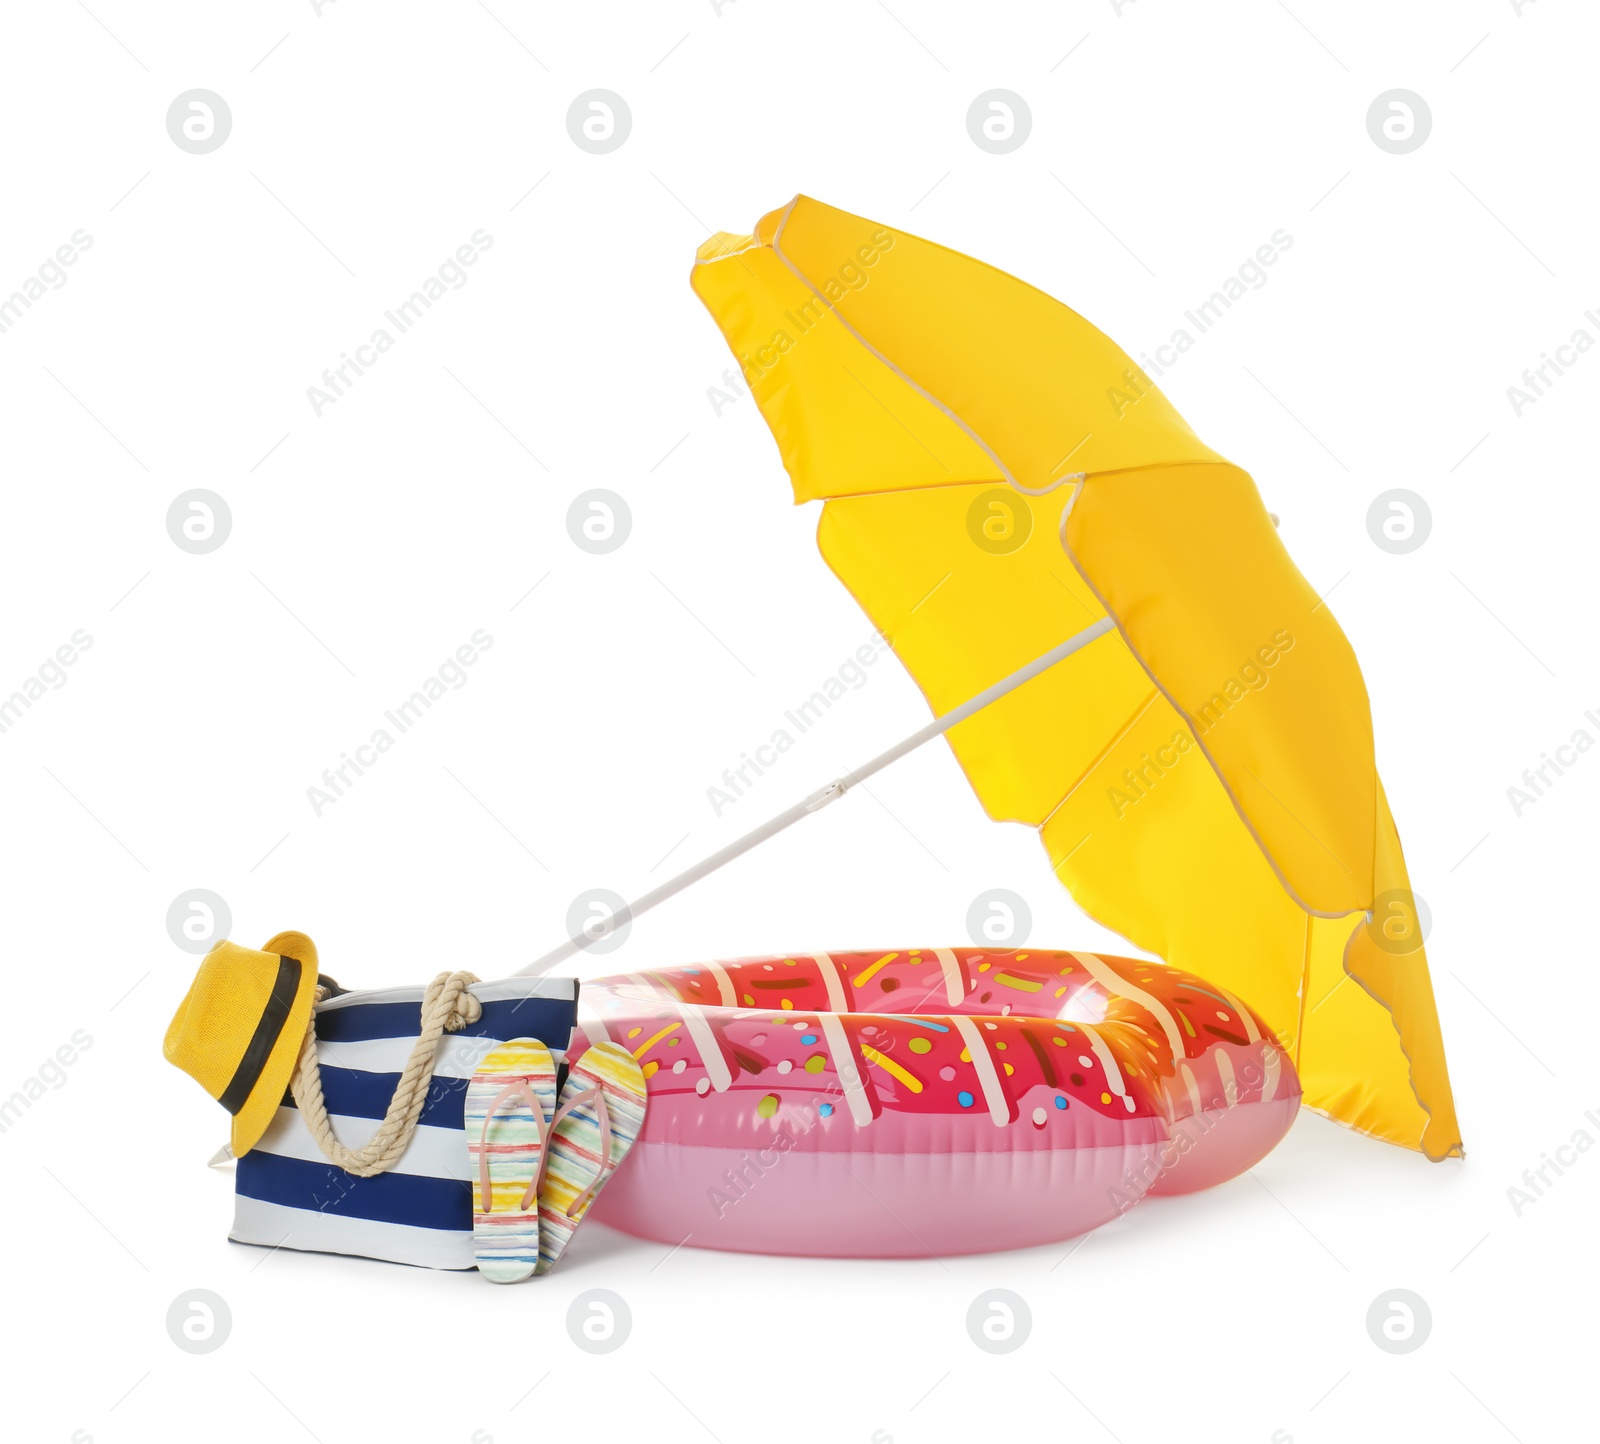 Photo of Open yellow beach umbrella, inflatable ring and accessories on white background